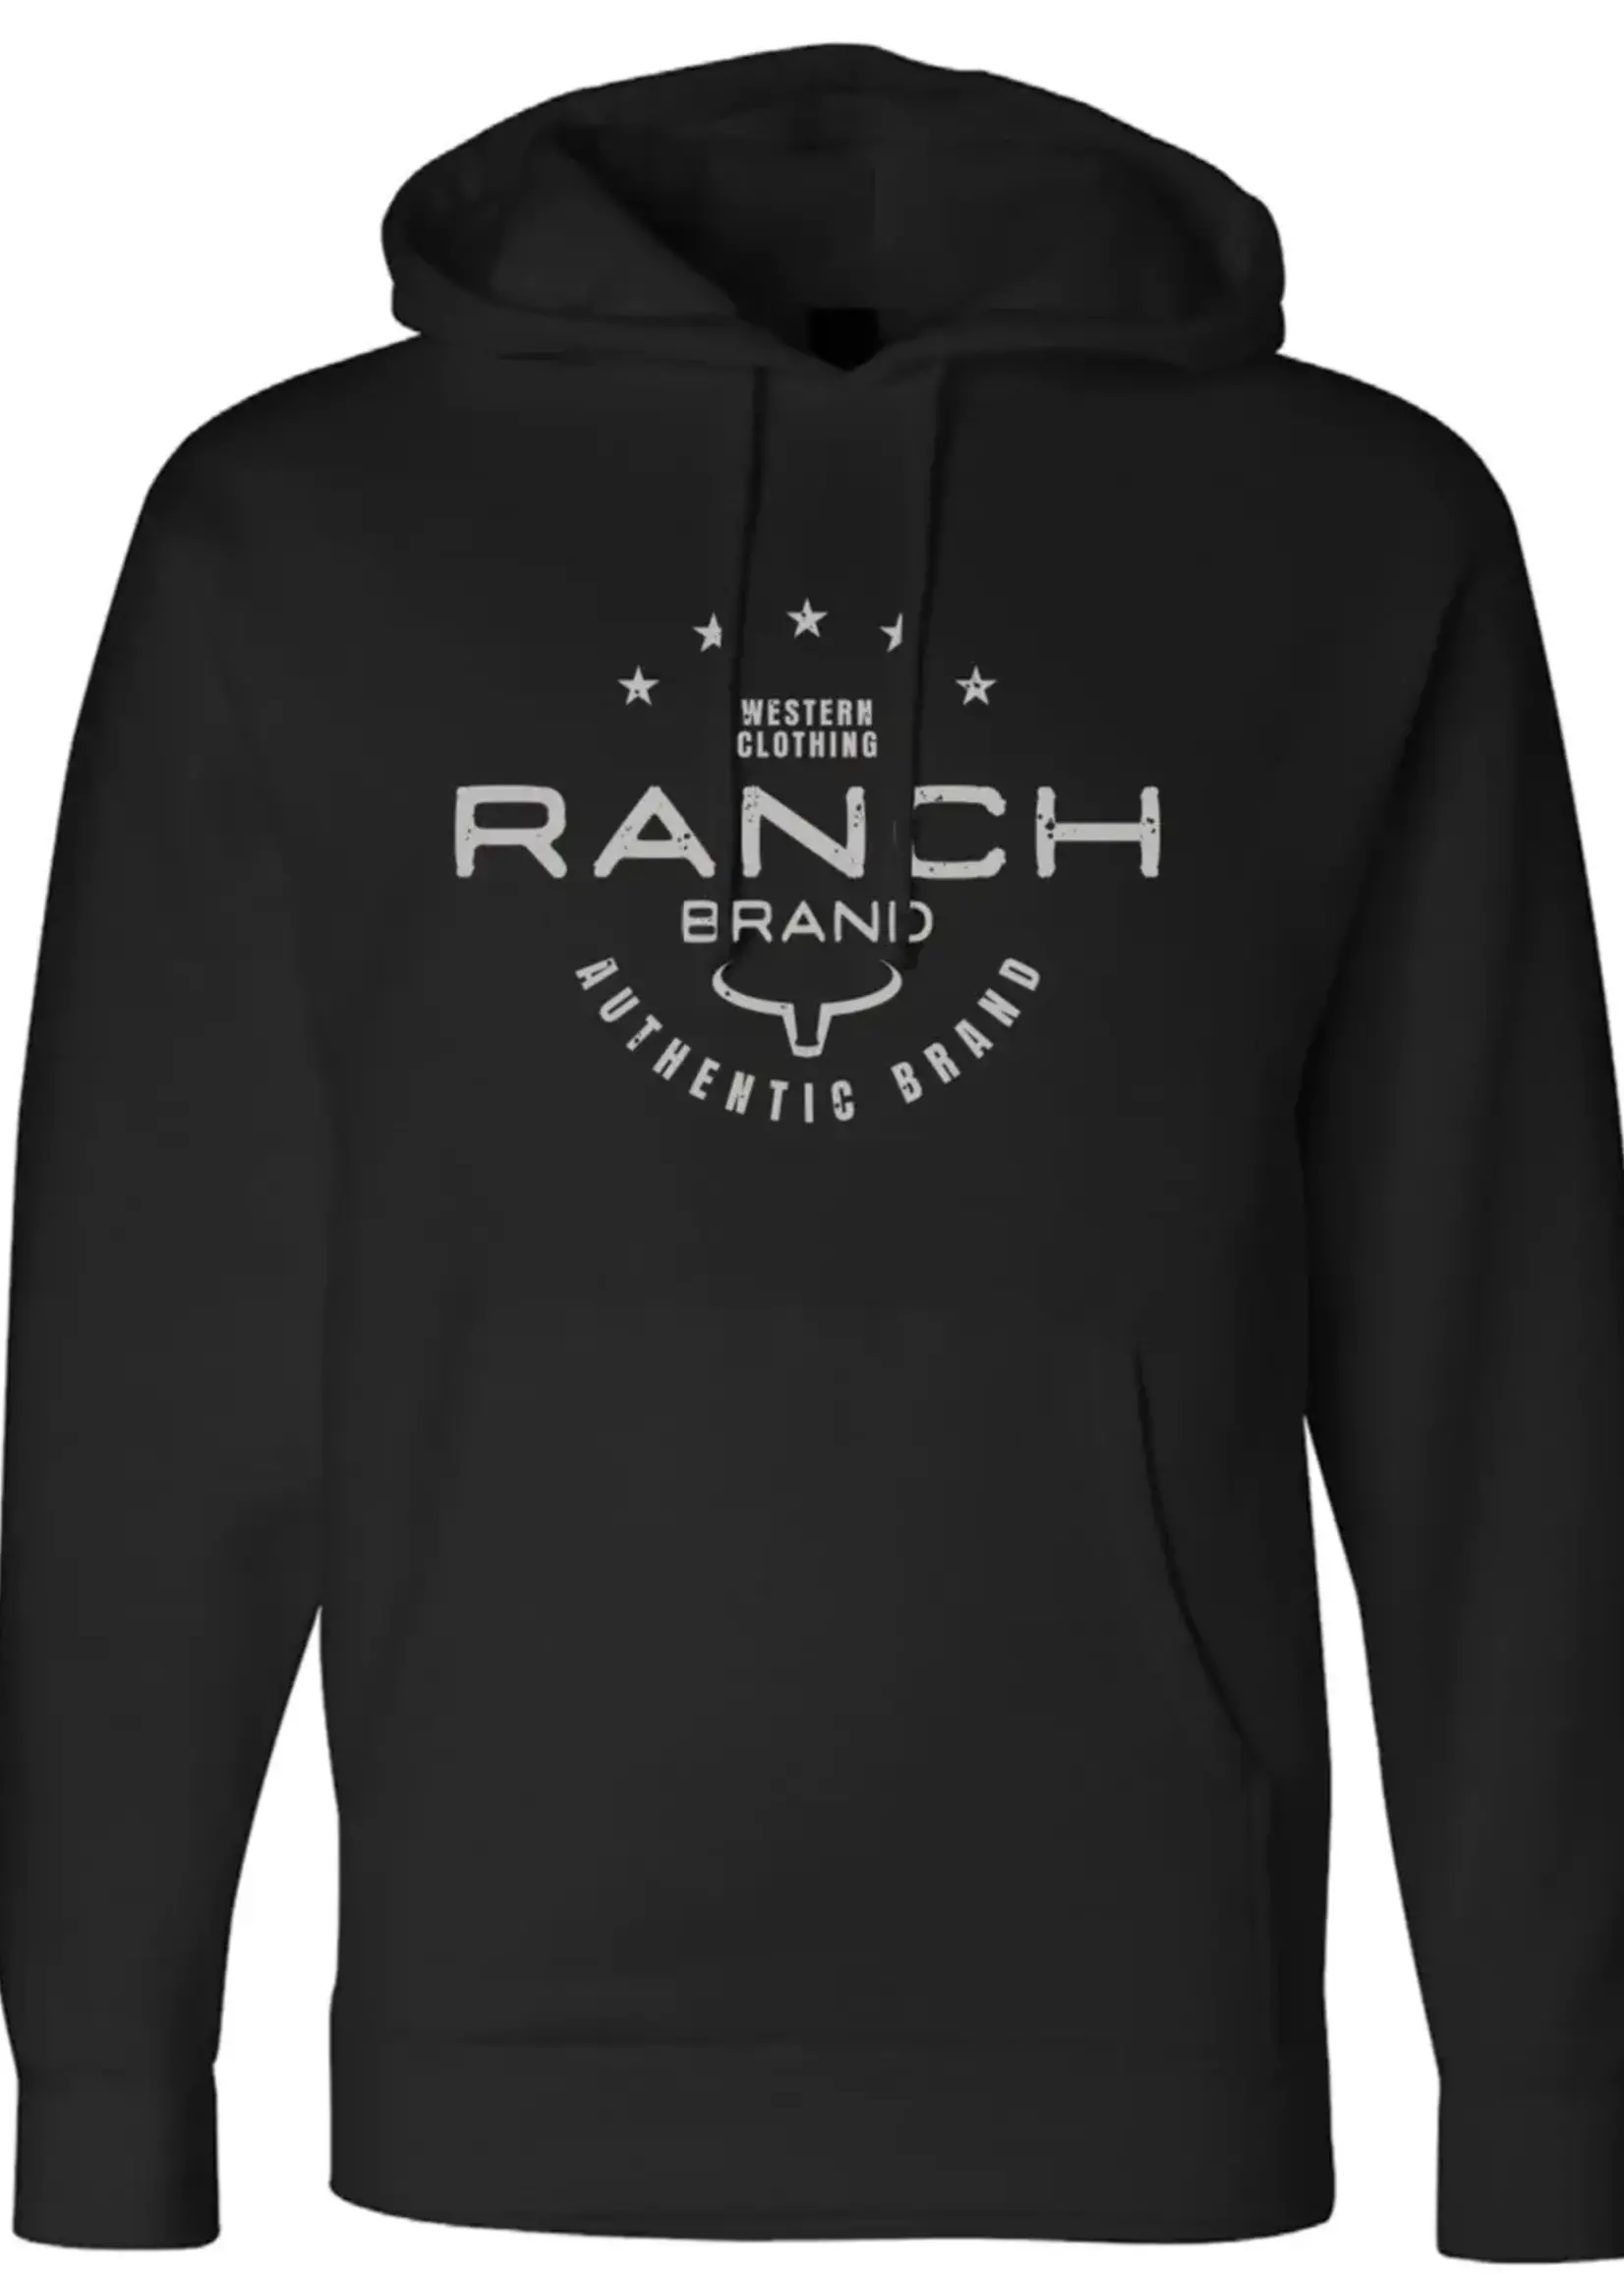 RANCH BRAND RANCHBRAND-HOODIES-UNISEXE-AUTHENTIC